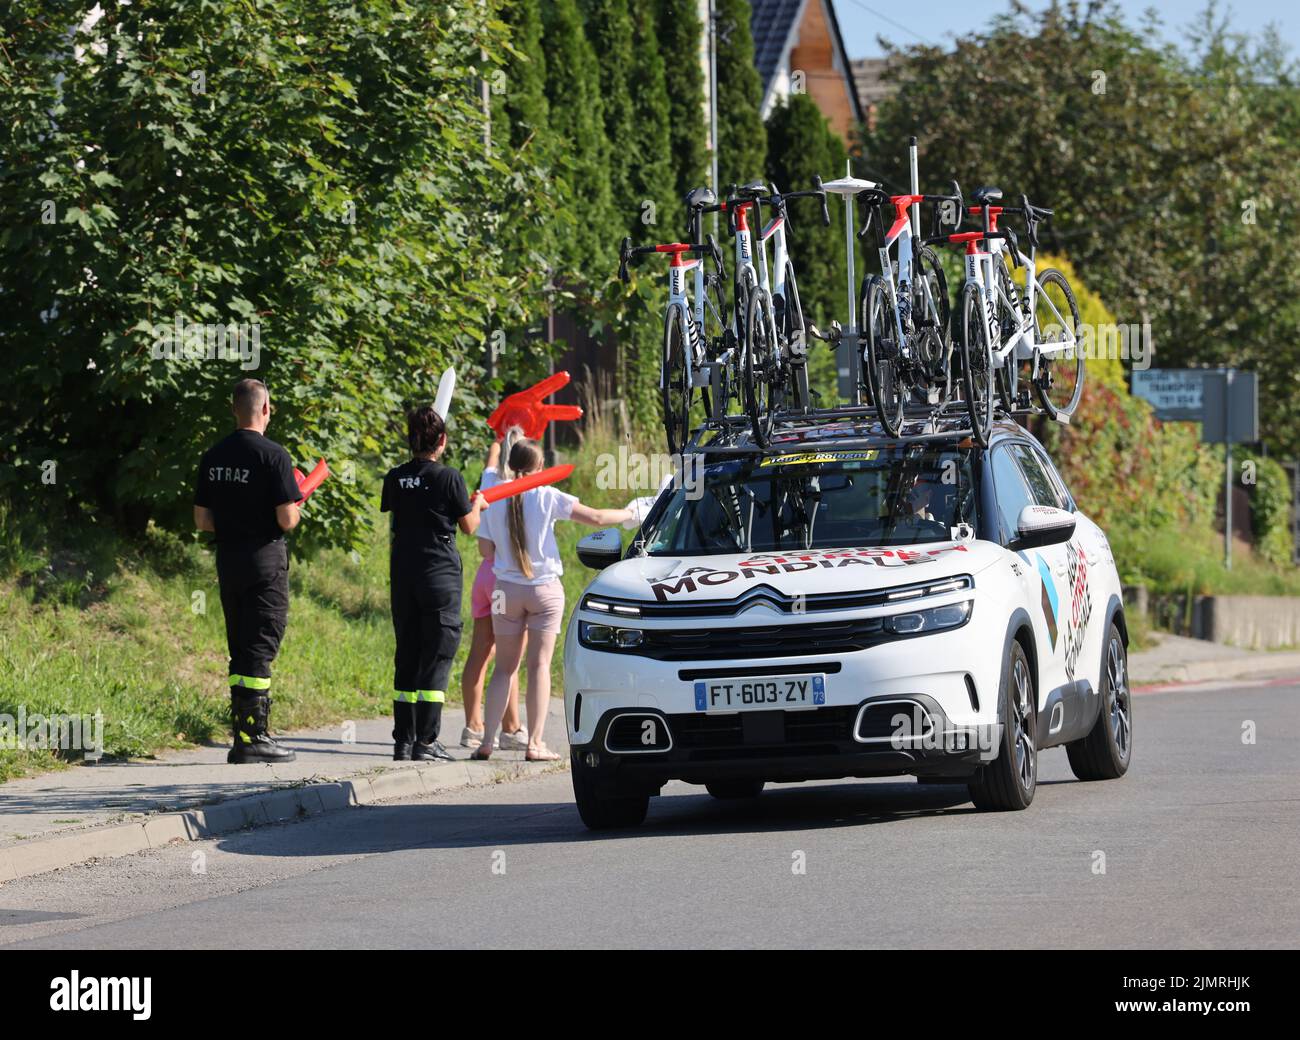 Krakow, Poland - August 5, 2022:  Ag2r Citroen Team vehicle on the route of Tour de Pologne UCI – World Tour, stage 7 Skawina - Krakow. The biggest cycling event in Eastern Europe. Stock Photo